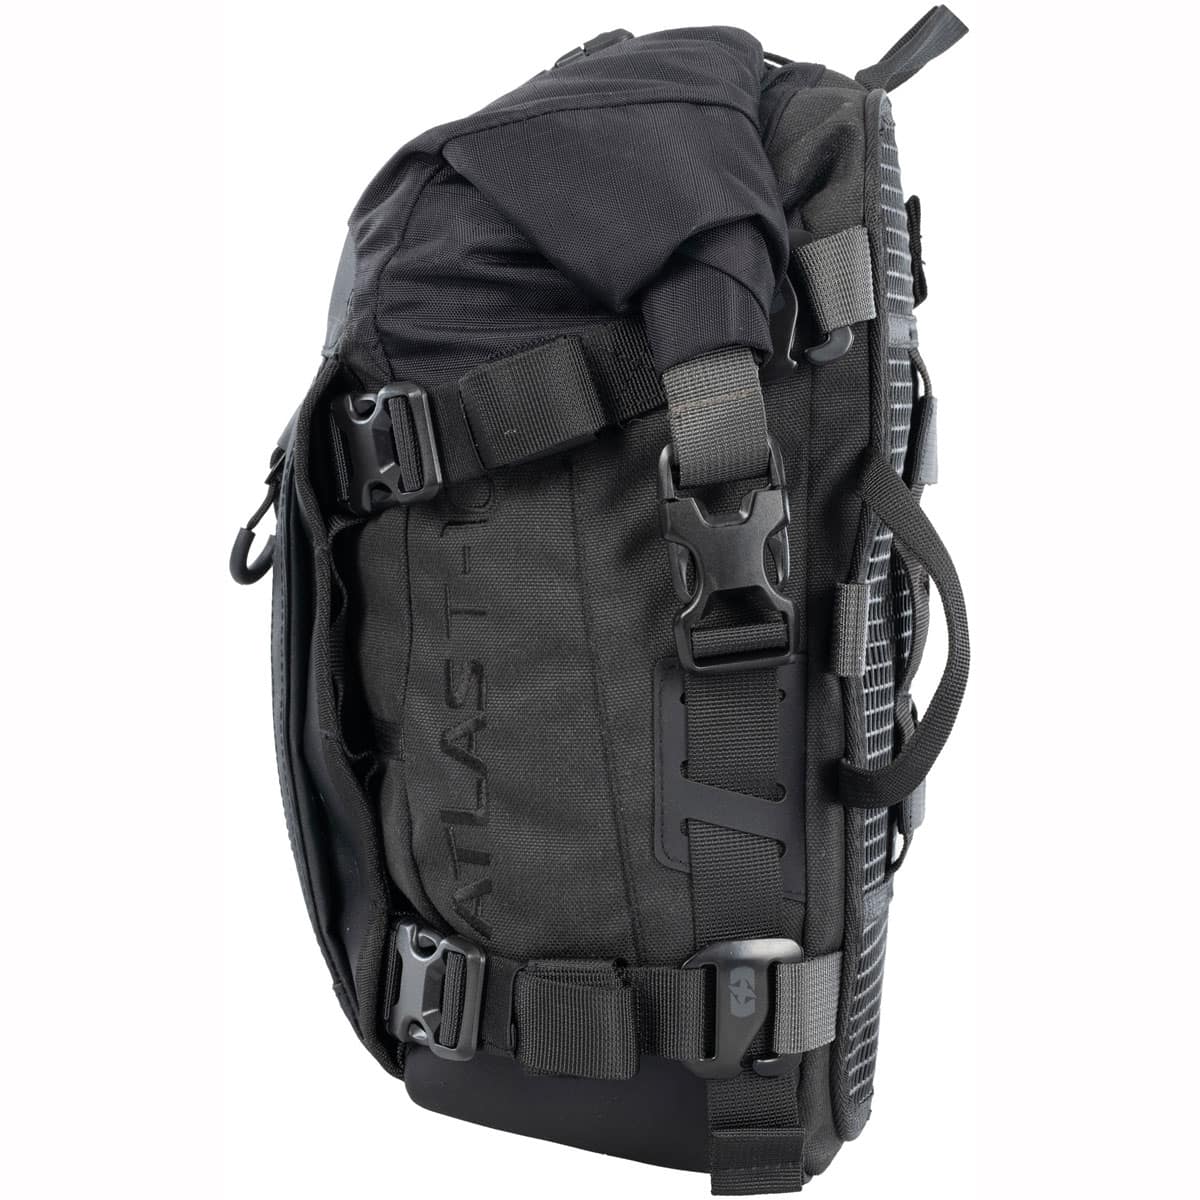 Get ready to explore without limits with the Oxford Atlas T-10 Advanced Tourpack. It's a tailpack designed for ultimate adaptability and durability.